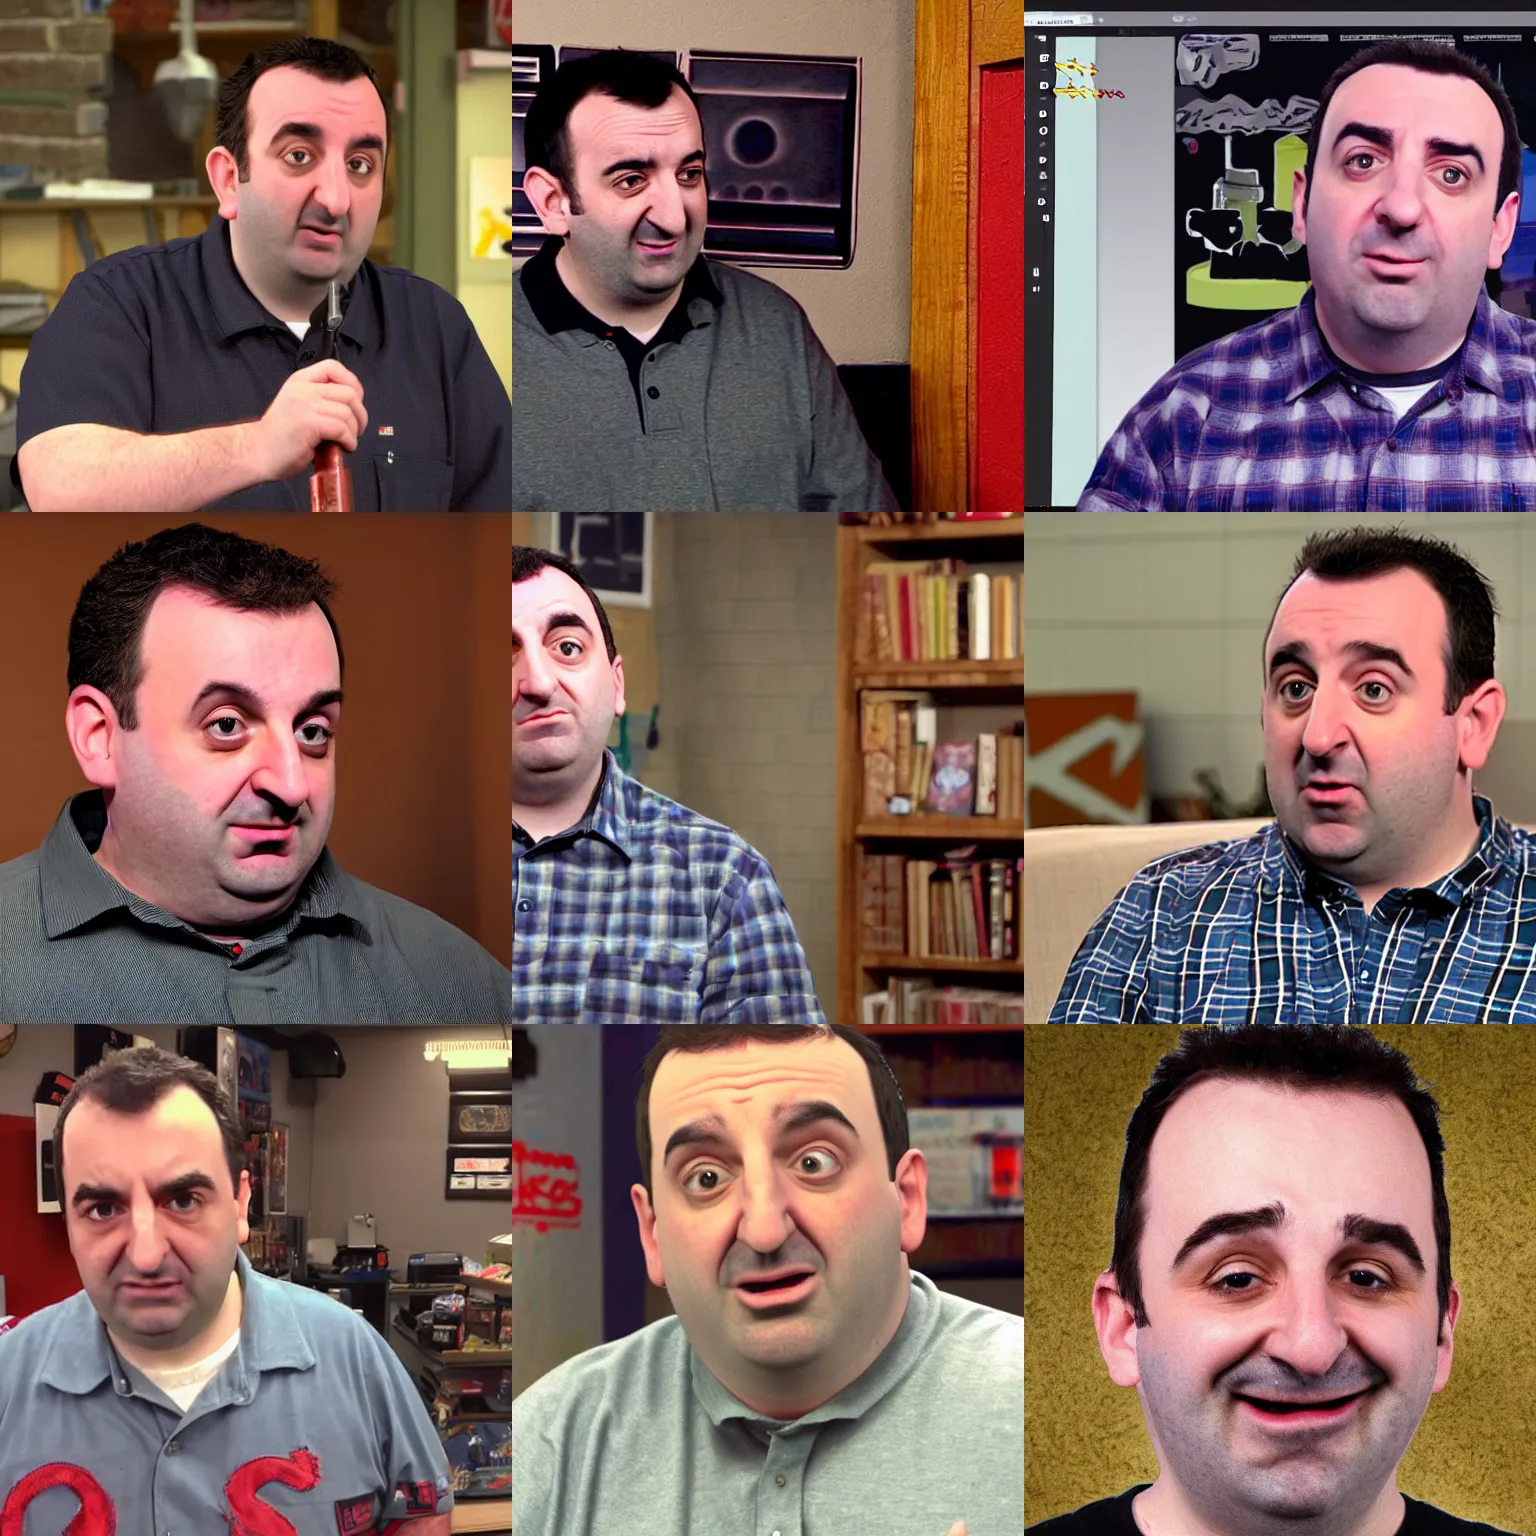 Prompt: Mike Stoklasa Stoklasa Stoklasa Stoklasa from Red Letter Media movie review fancam, bored expression, beautiful trending detailed photorealistic